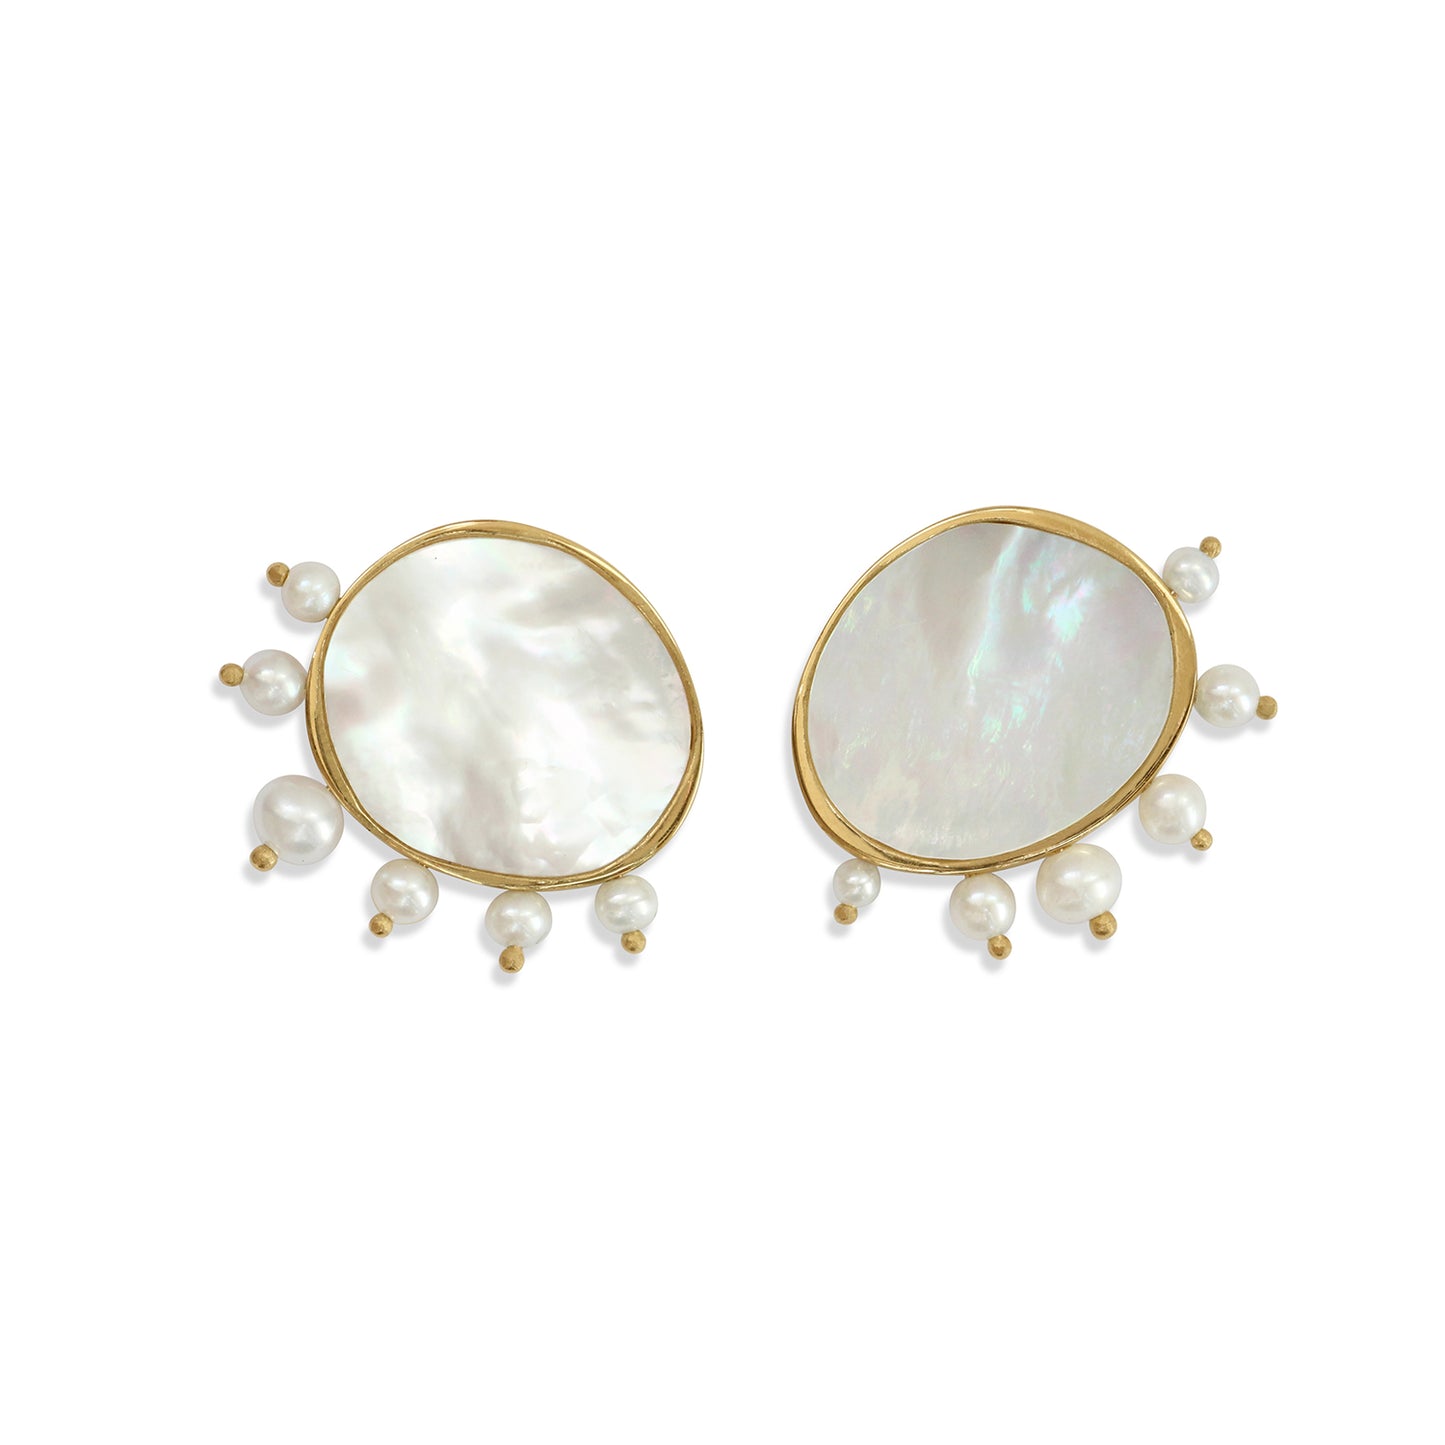 Front view of Amorphous Pearl Earrings / Large Circle